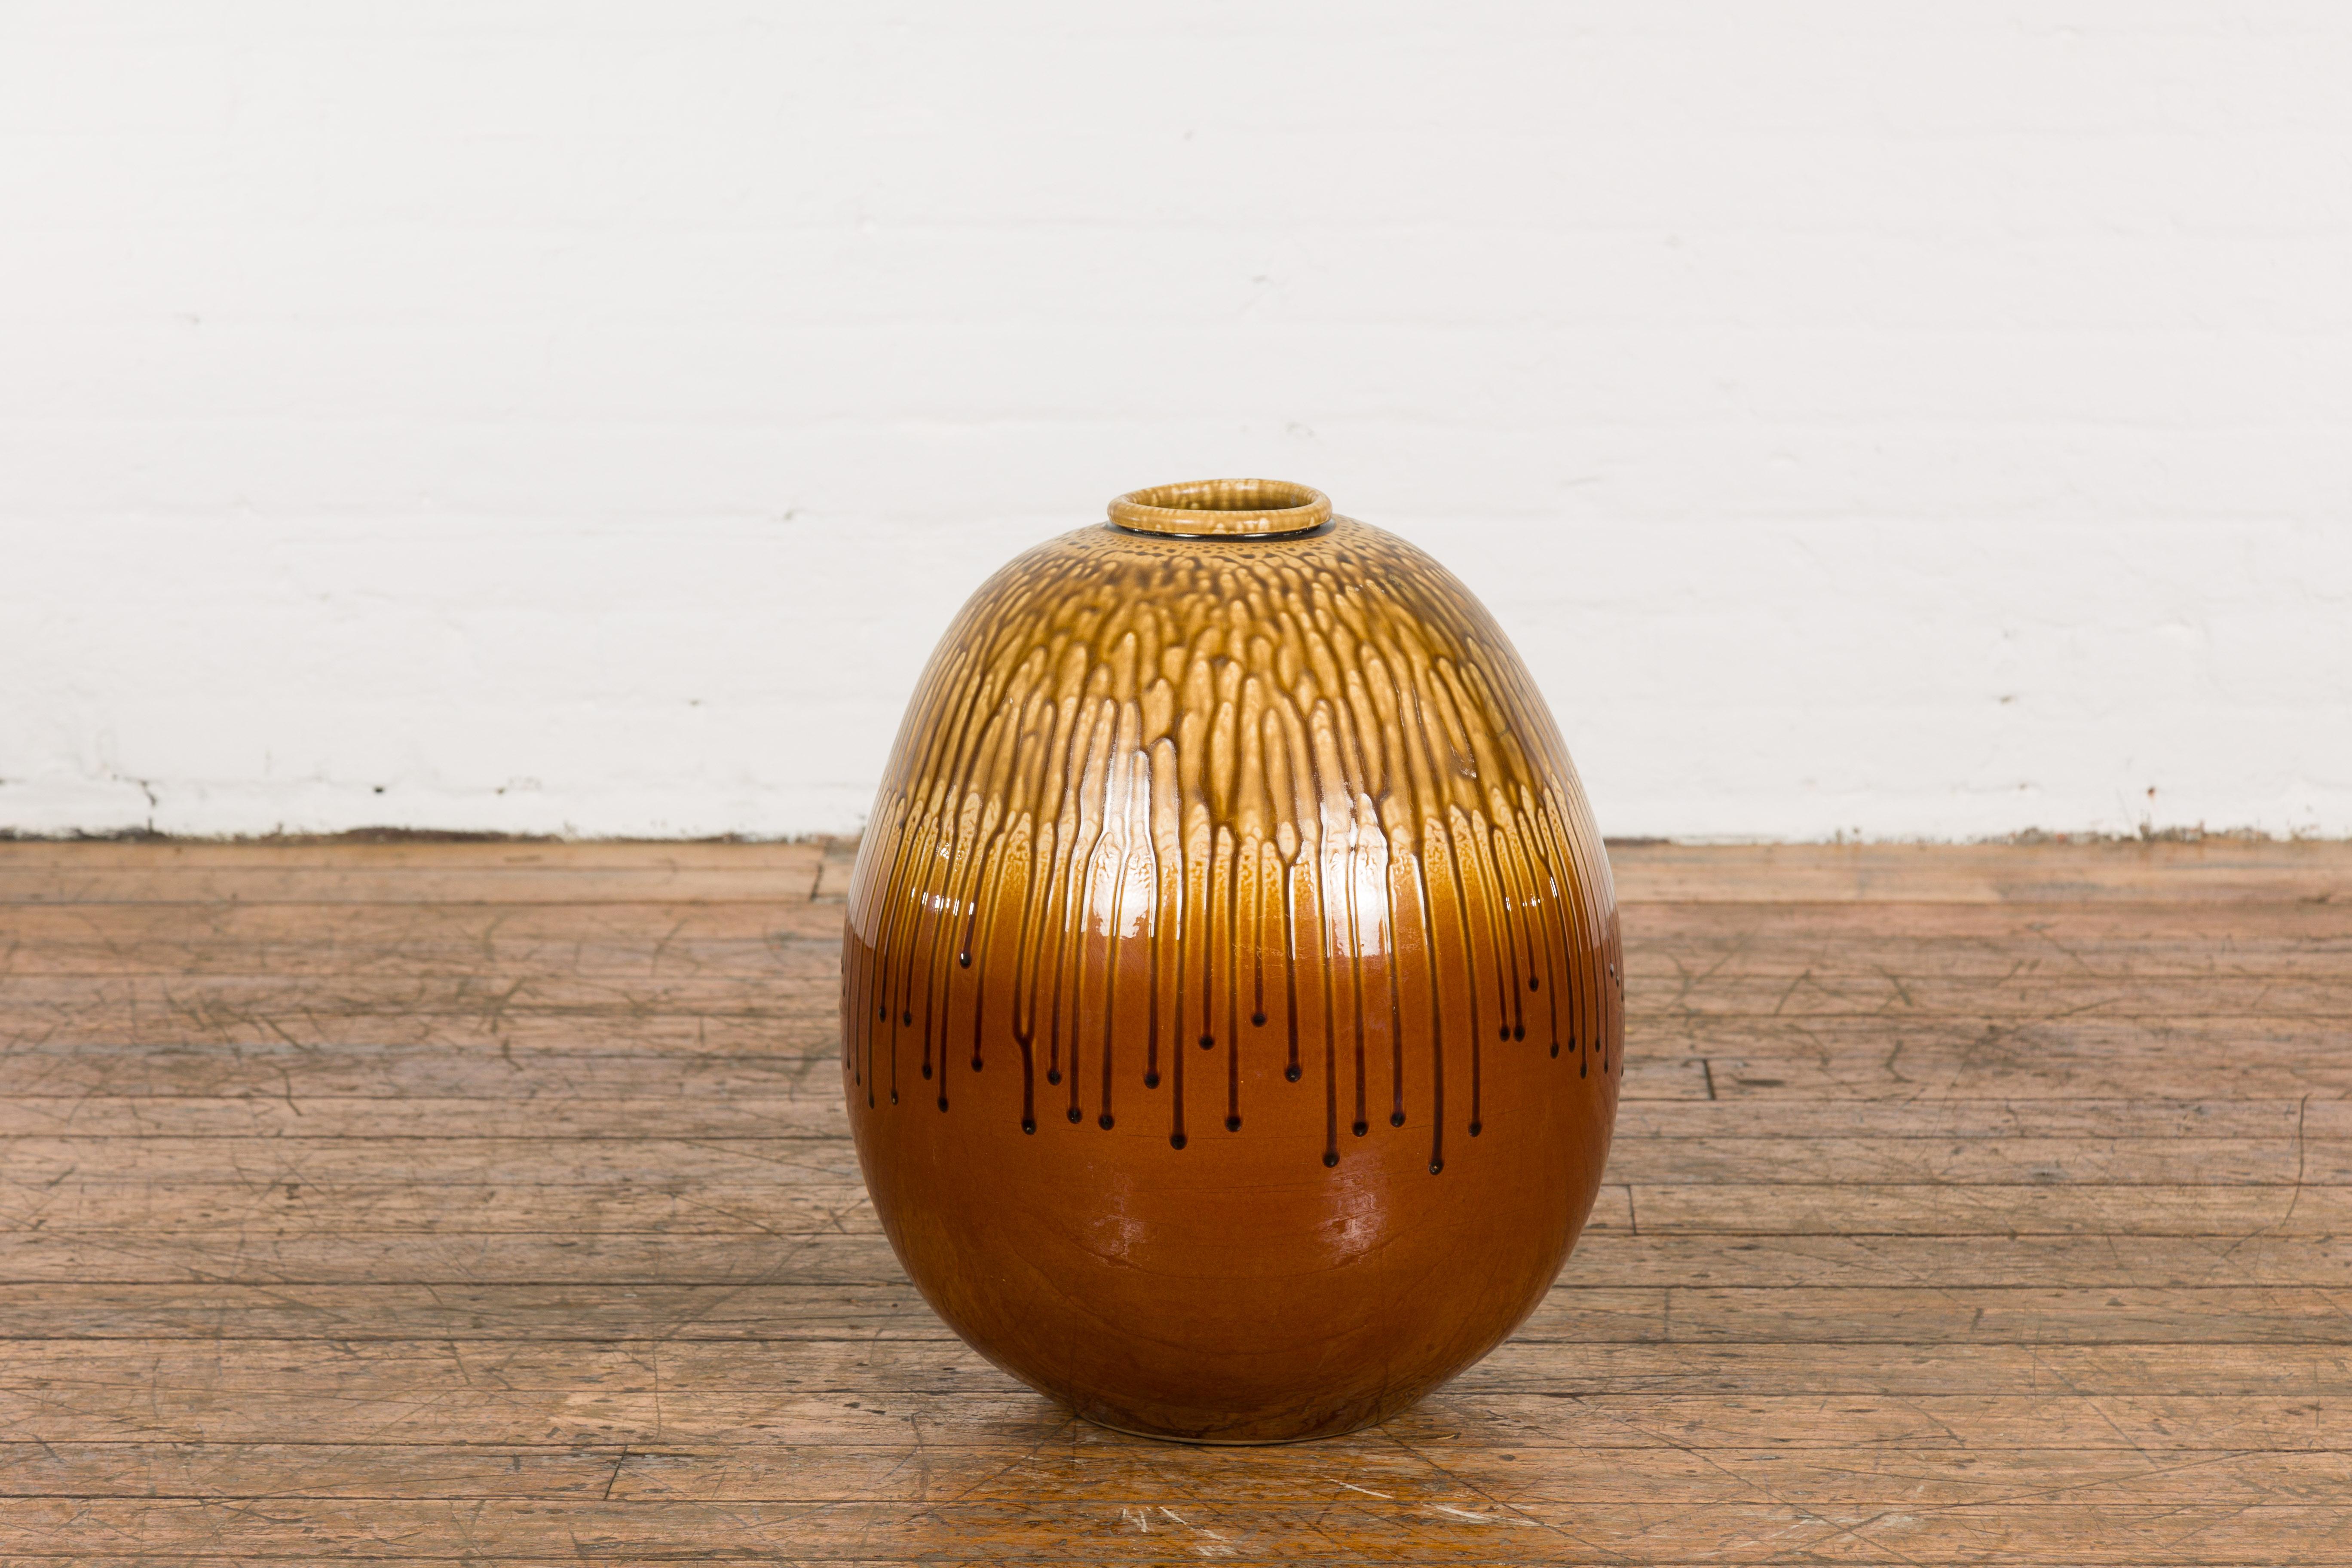 A Prem Collection ceramic artisan handcrafted two toned vase with brown, yellow and orange glaze and dripping motifs. Breathe life into your space with this artisan handcrafted ceramic vase from the Prem Collection. Displaying an exquisite blend of